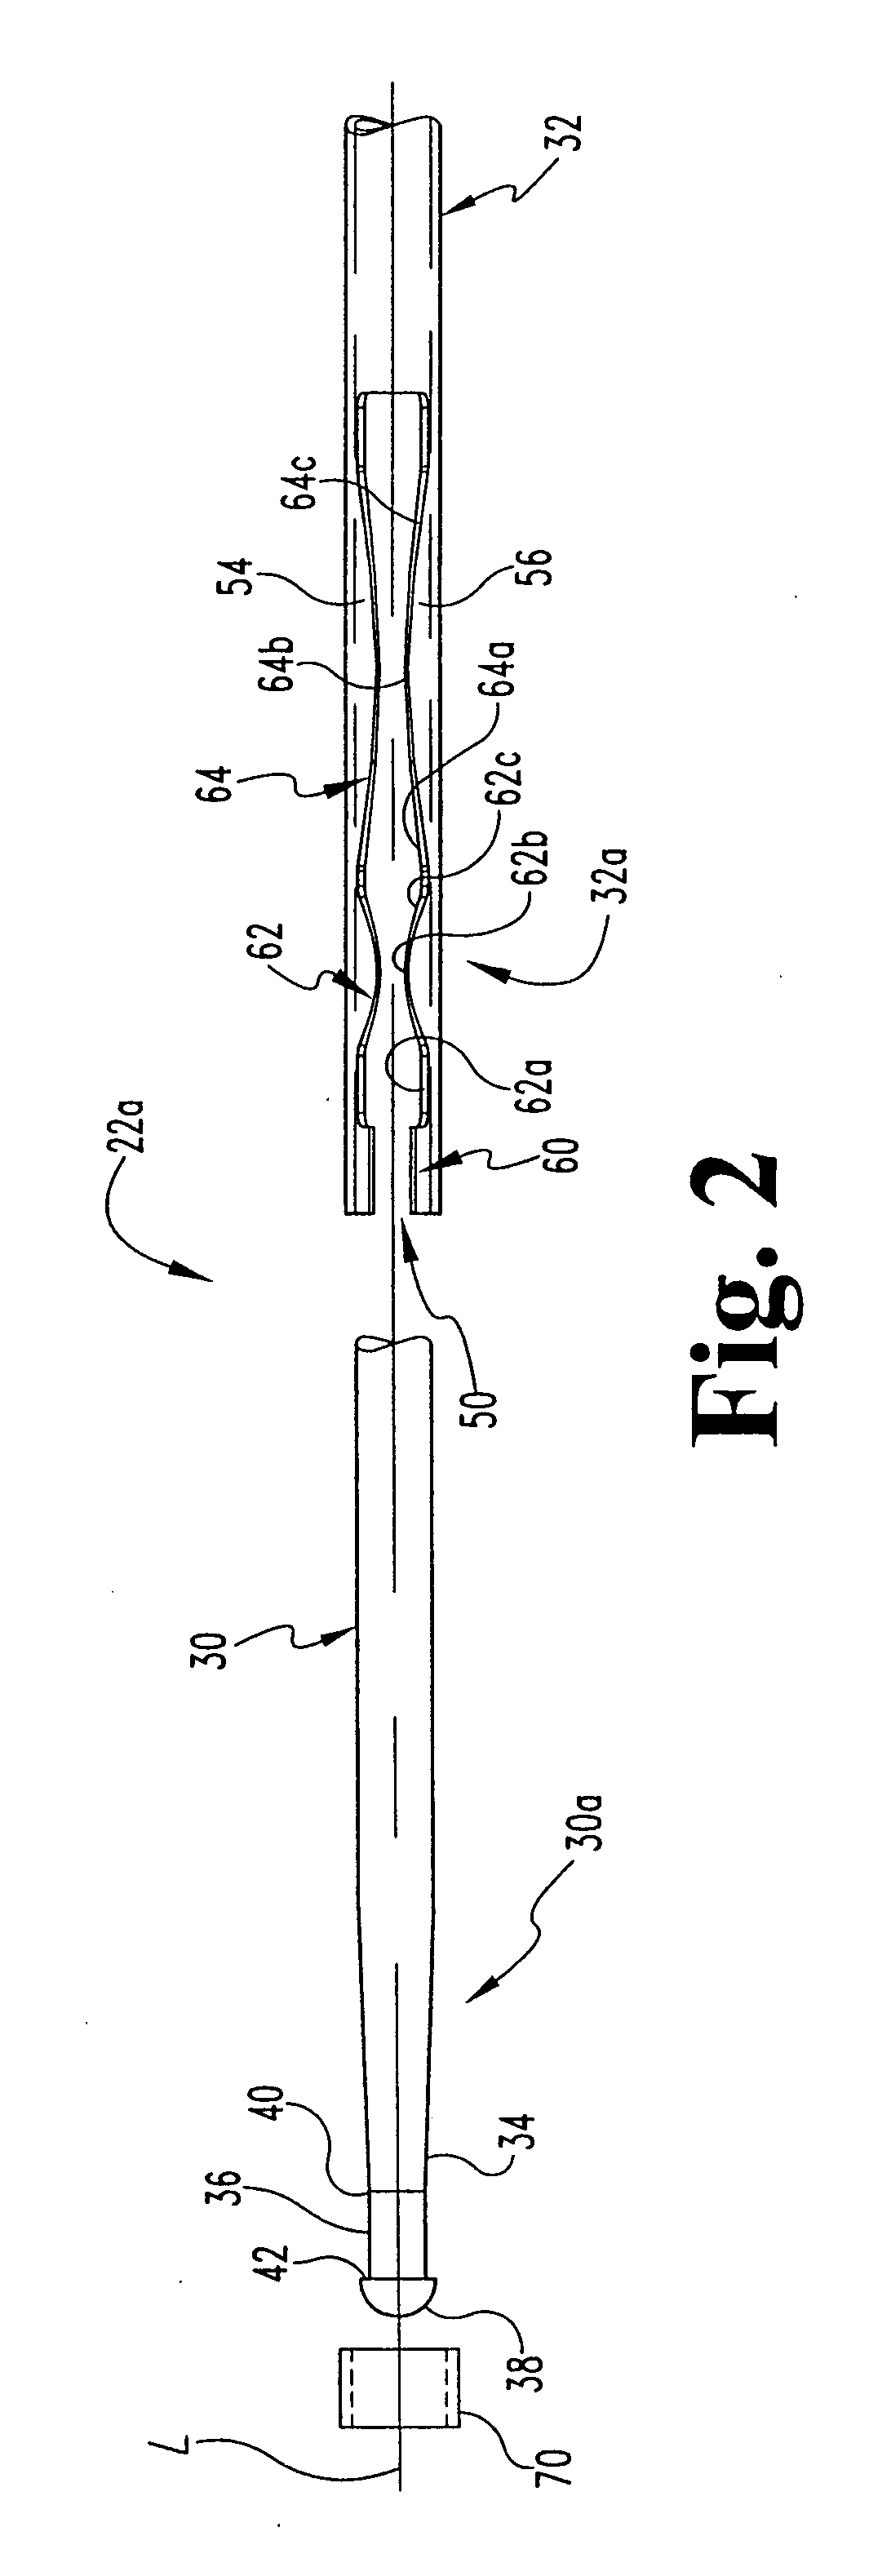 Surgical instrumentation and method for treatment of the spine